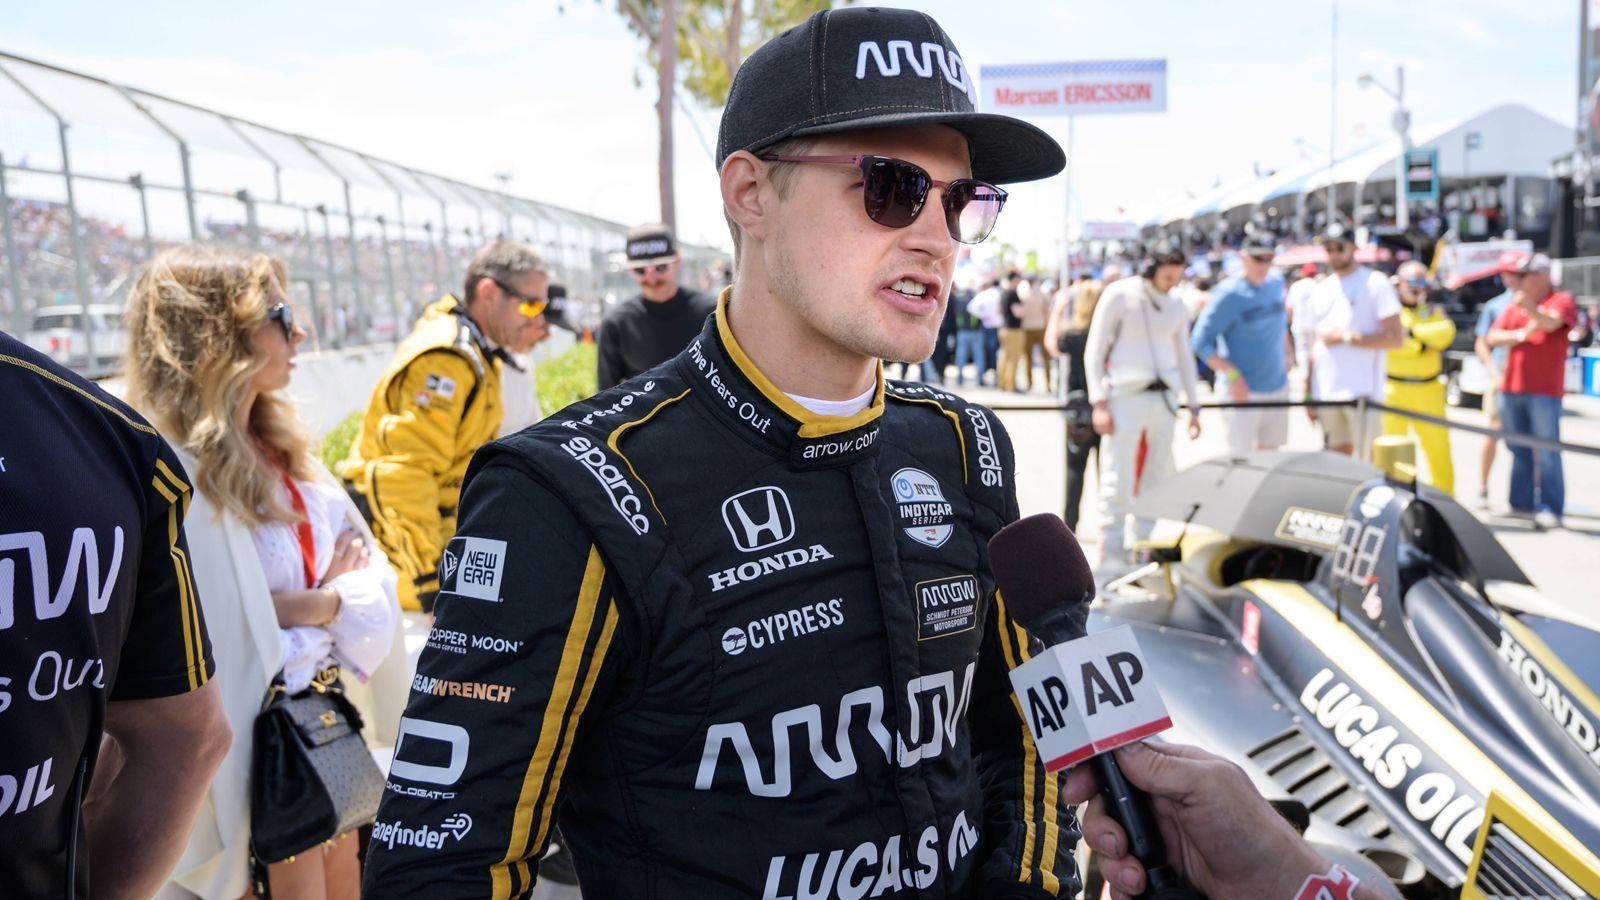 
                <strong>6. Marcus Ericsson </strong><br>
                Punkte insgesamt: 18Aktuelle Punkte: 0Punkte 2014: 5Punkte 2015: 4Punkte 2016: 2Punkte 2017: 2Punkte 2018: 5Punkte 2019: /
              